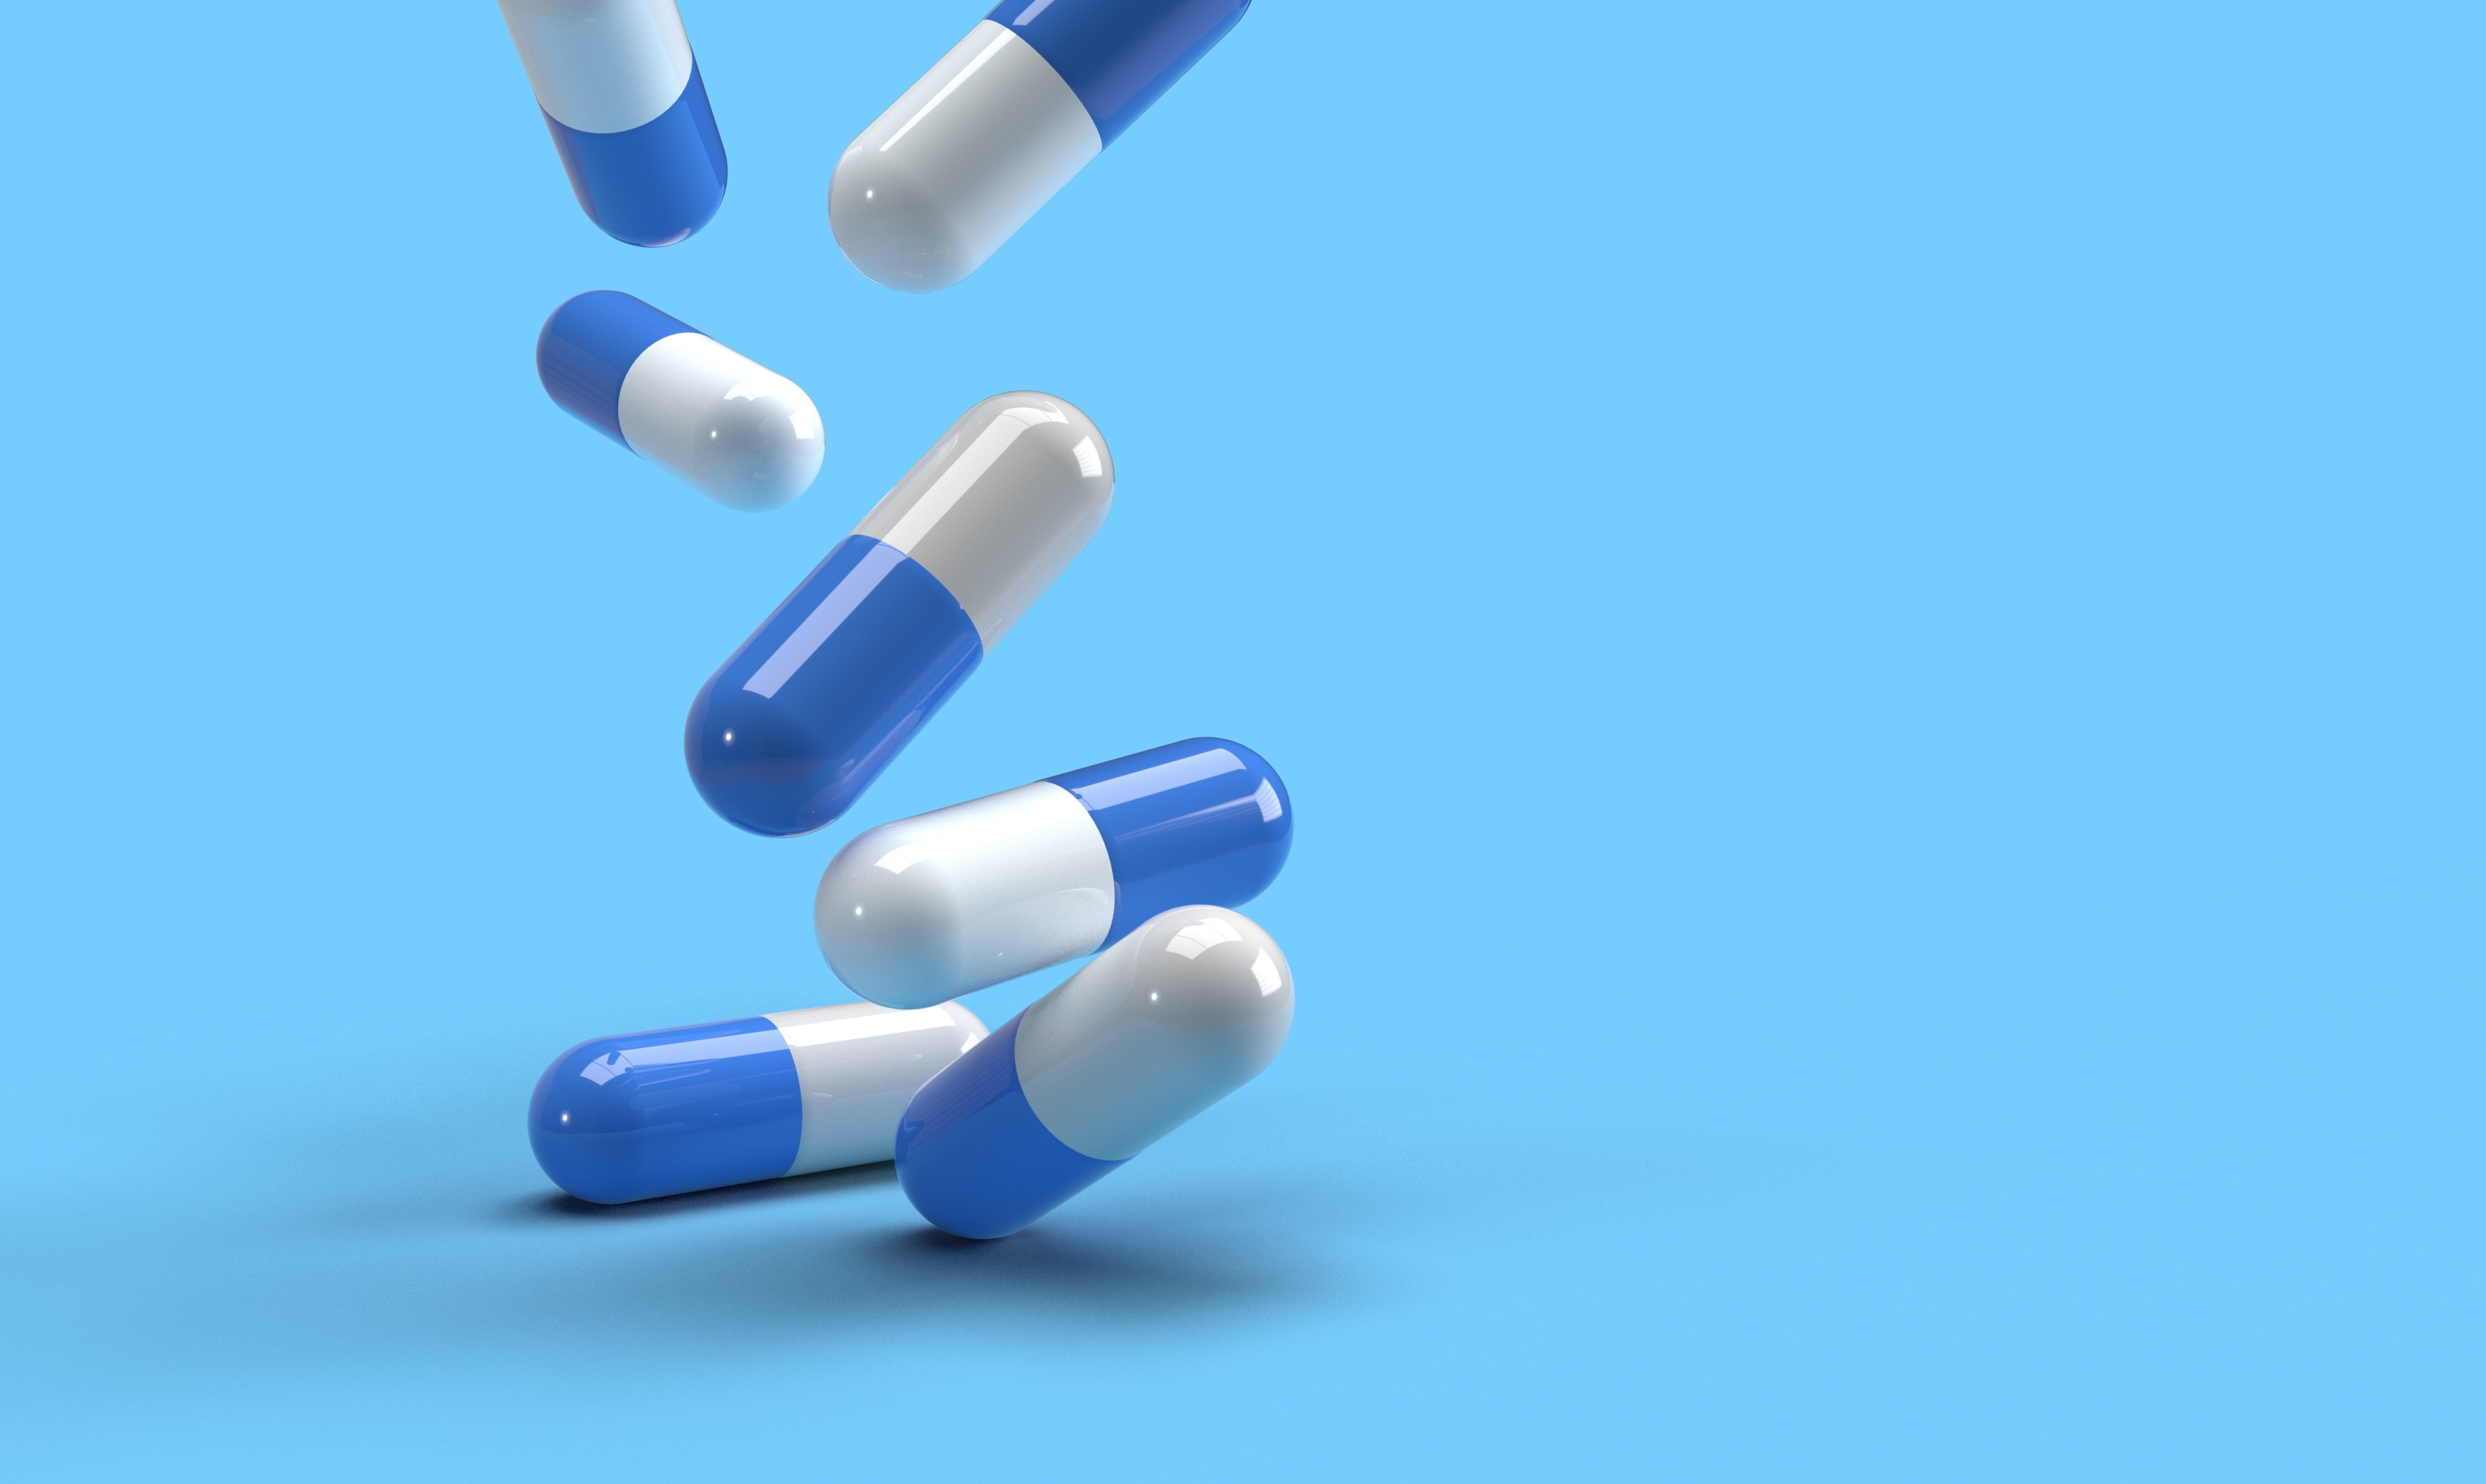 Hong Kong’s public hospitals plan to speed up the process for adding new drugs to their formulary. Image: Shutterstock